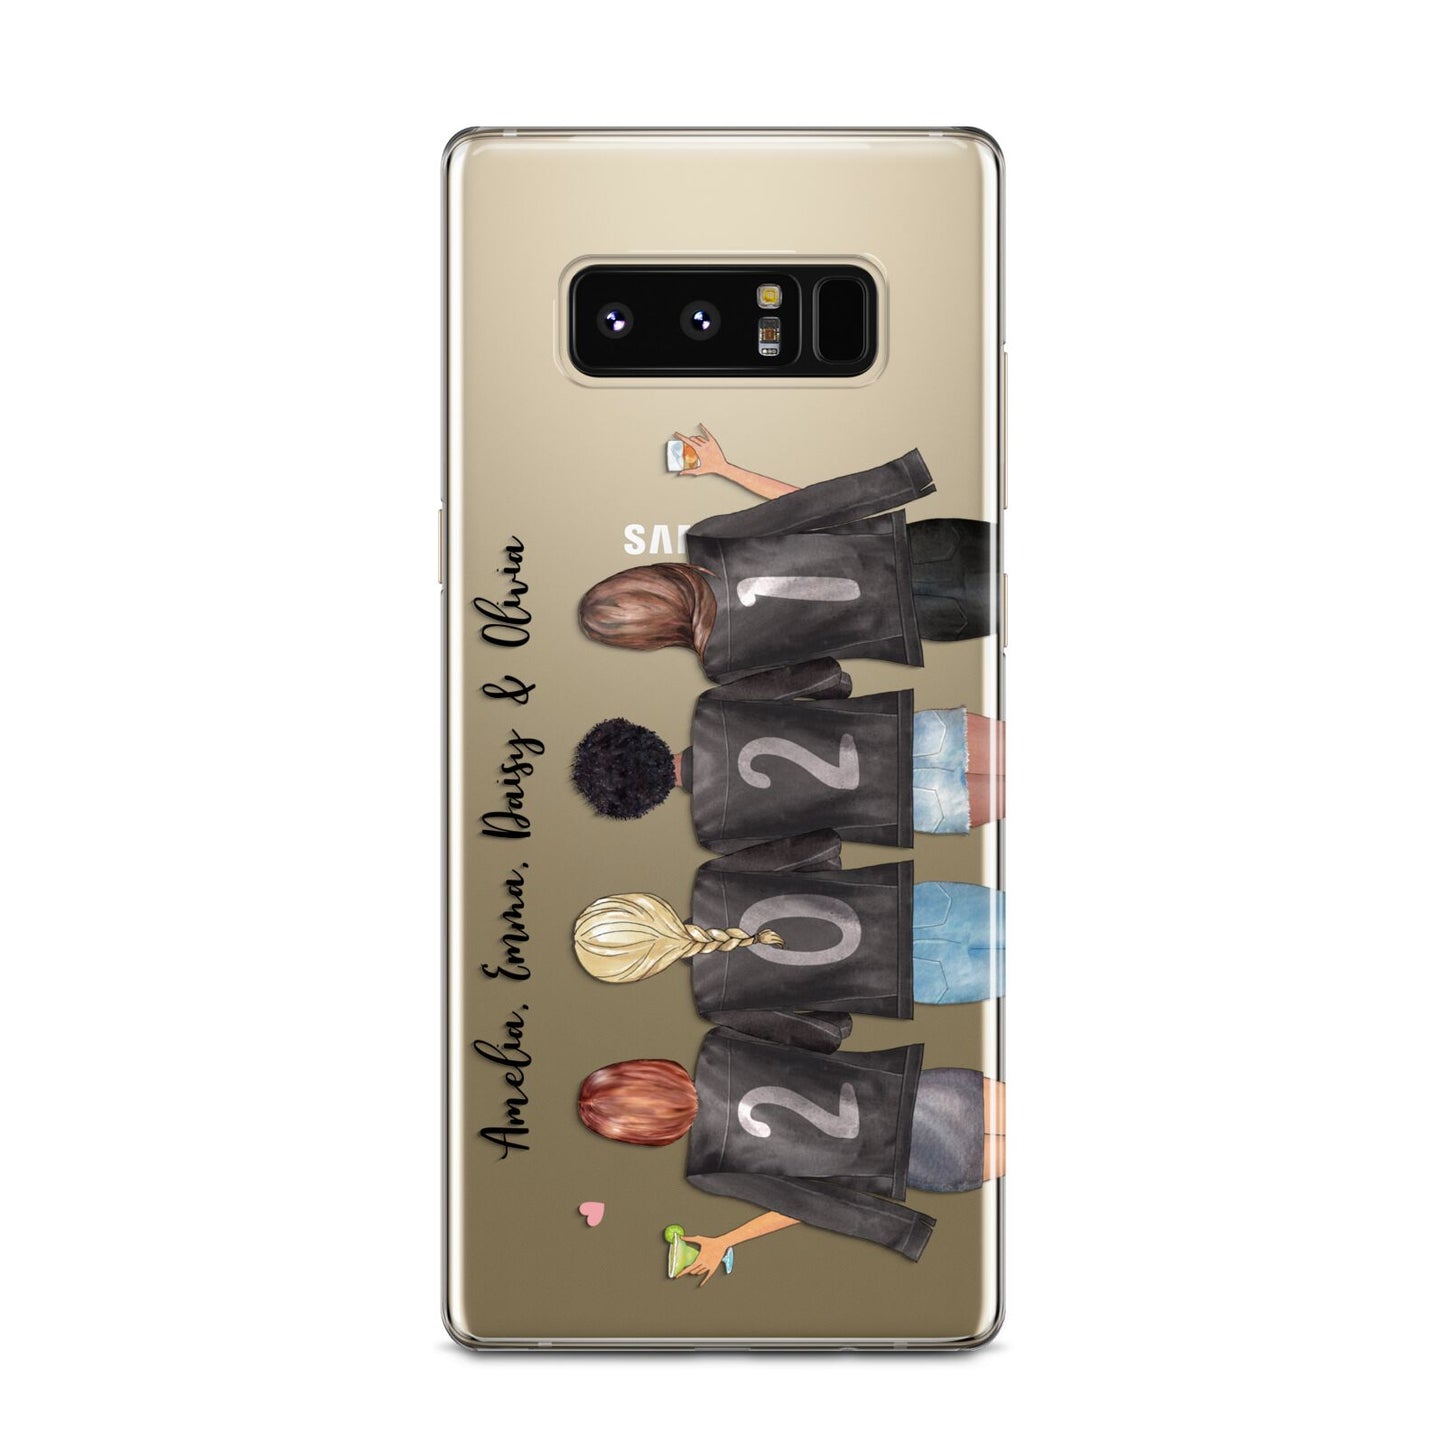 4 Best Friends with Names Samsung Galaxy Note 8 Case